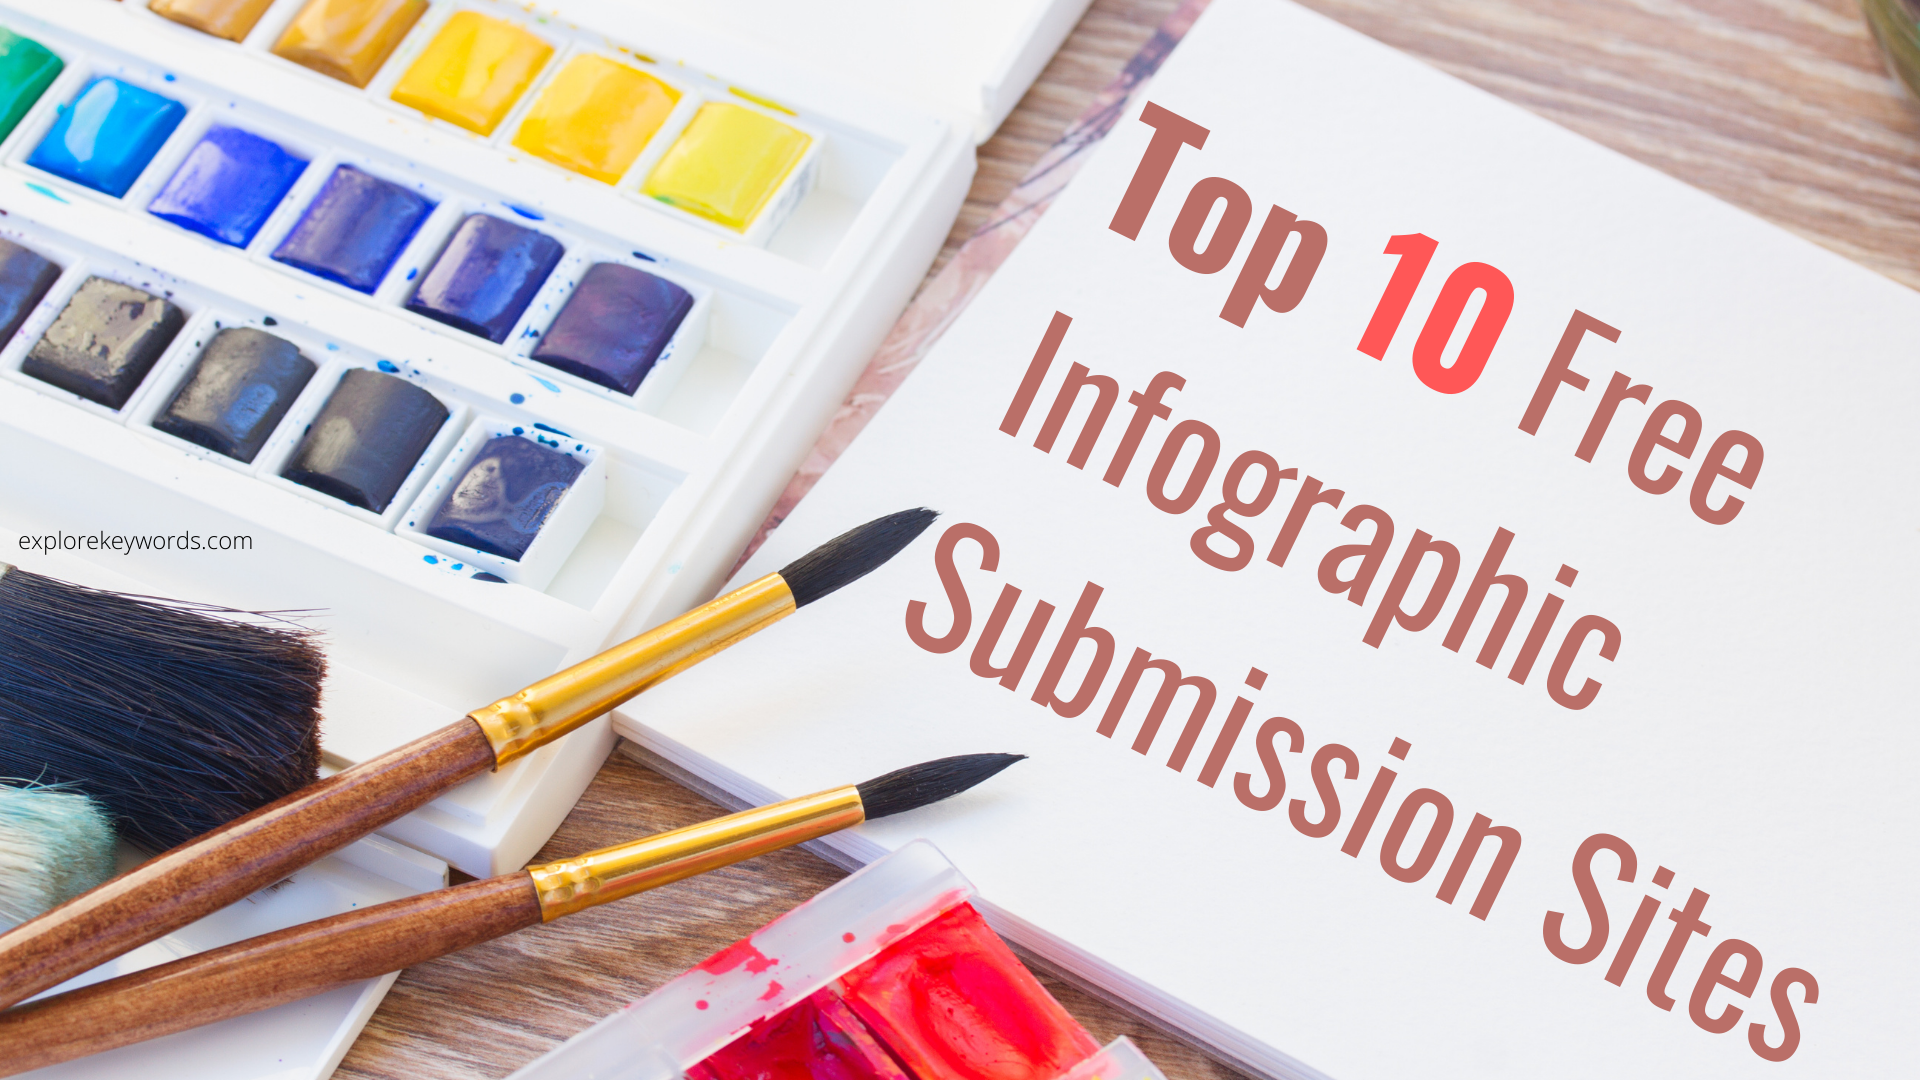 Top 10 Free Infographic Submission Sites